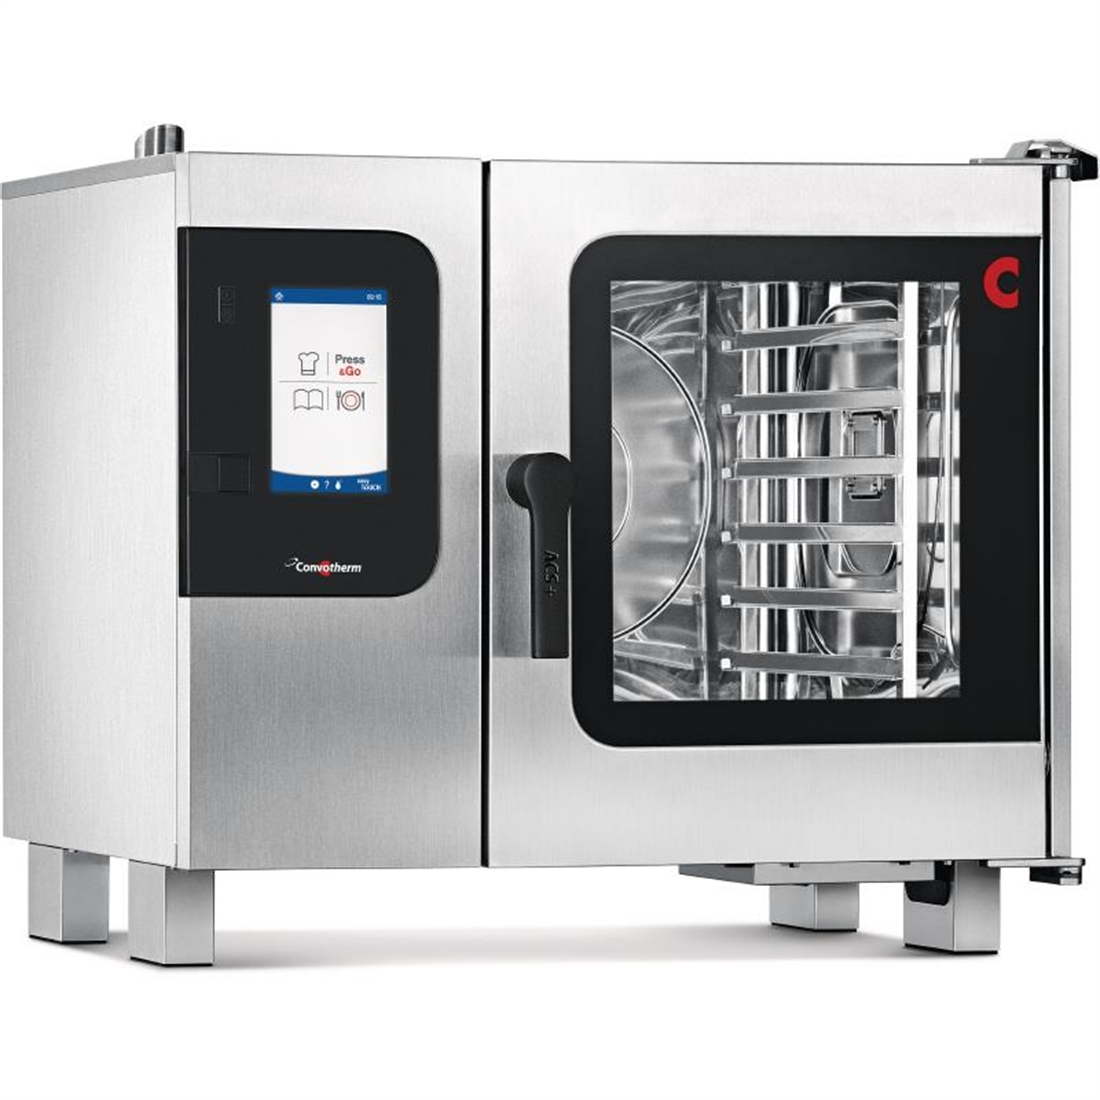 Convotherm 4 easyTouch Combi Oven 6 x 1 x1 GN Grid